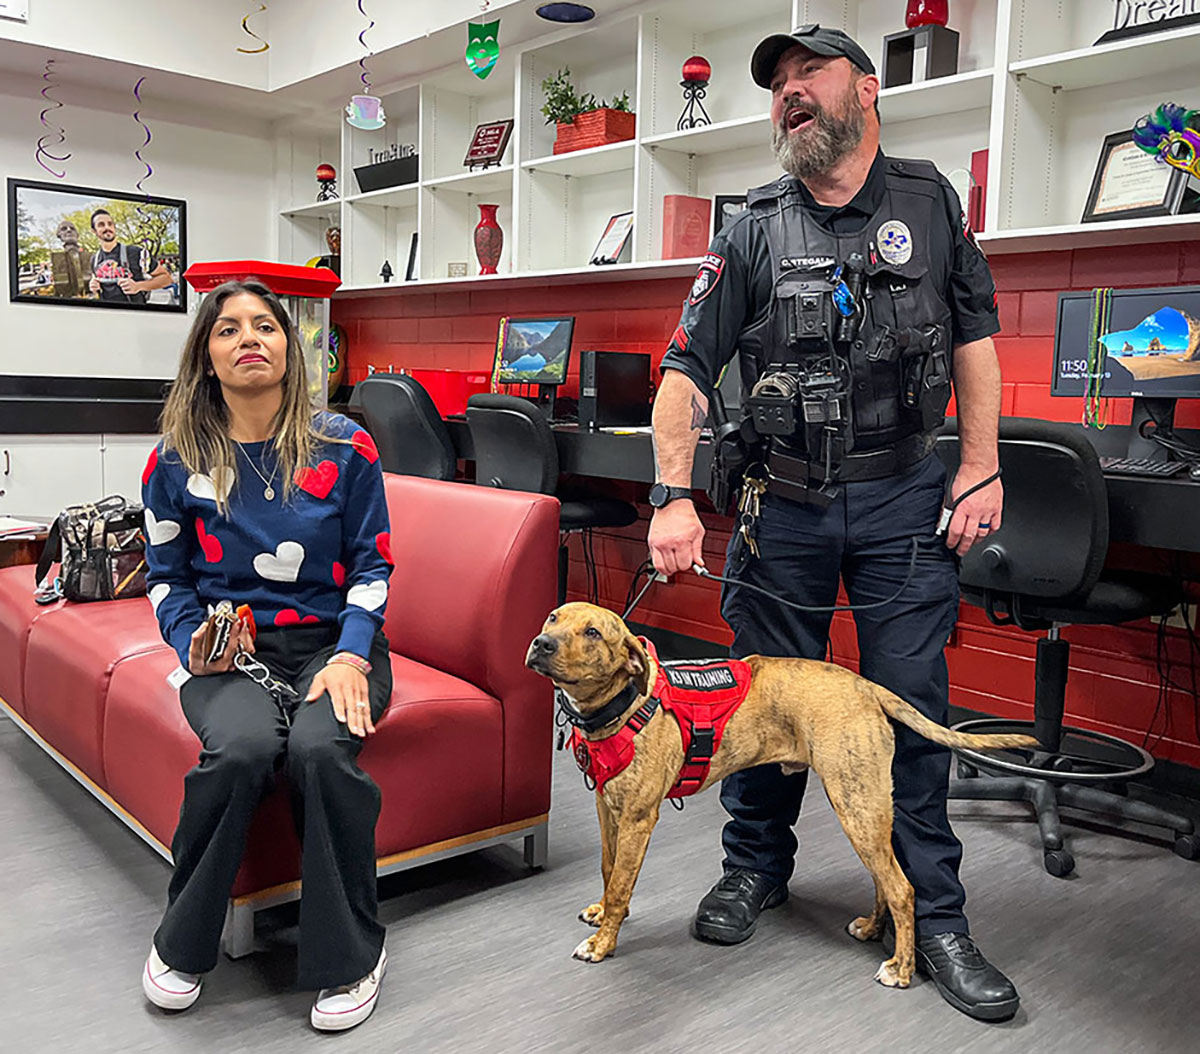 LUPD and staff with Derrick Boomer Lamar during the Mardi Paws pet food drive, Feb. 13, in the Galloway Business Building. UP photo by Brian Quijada.